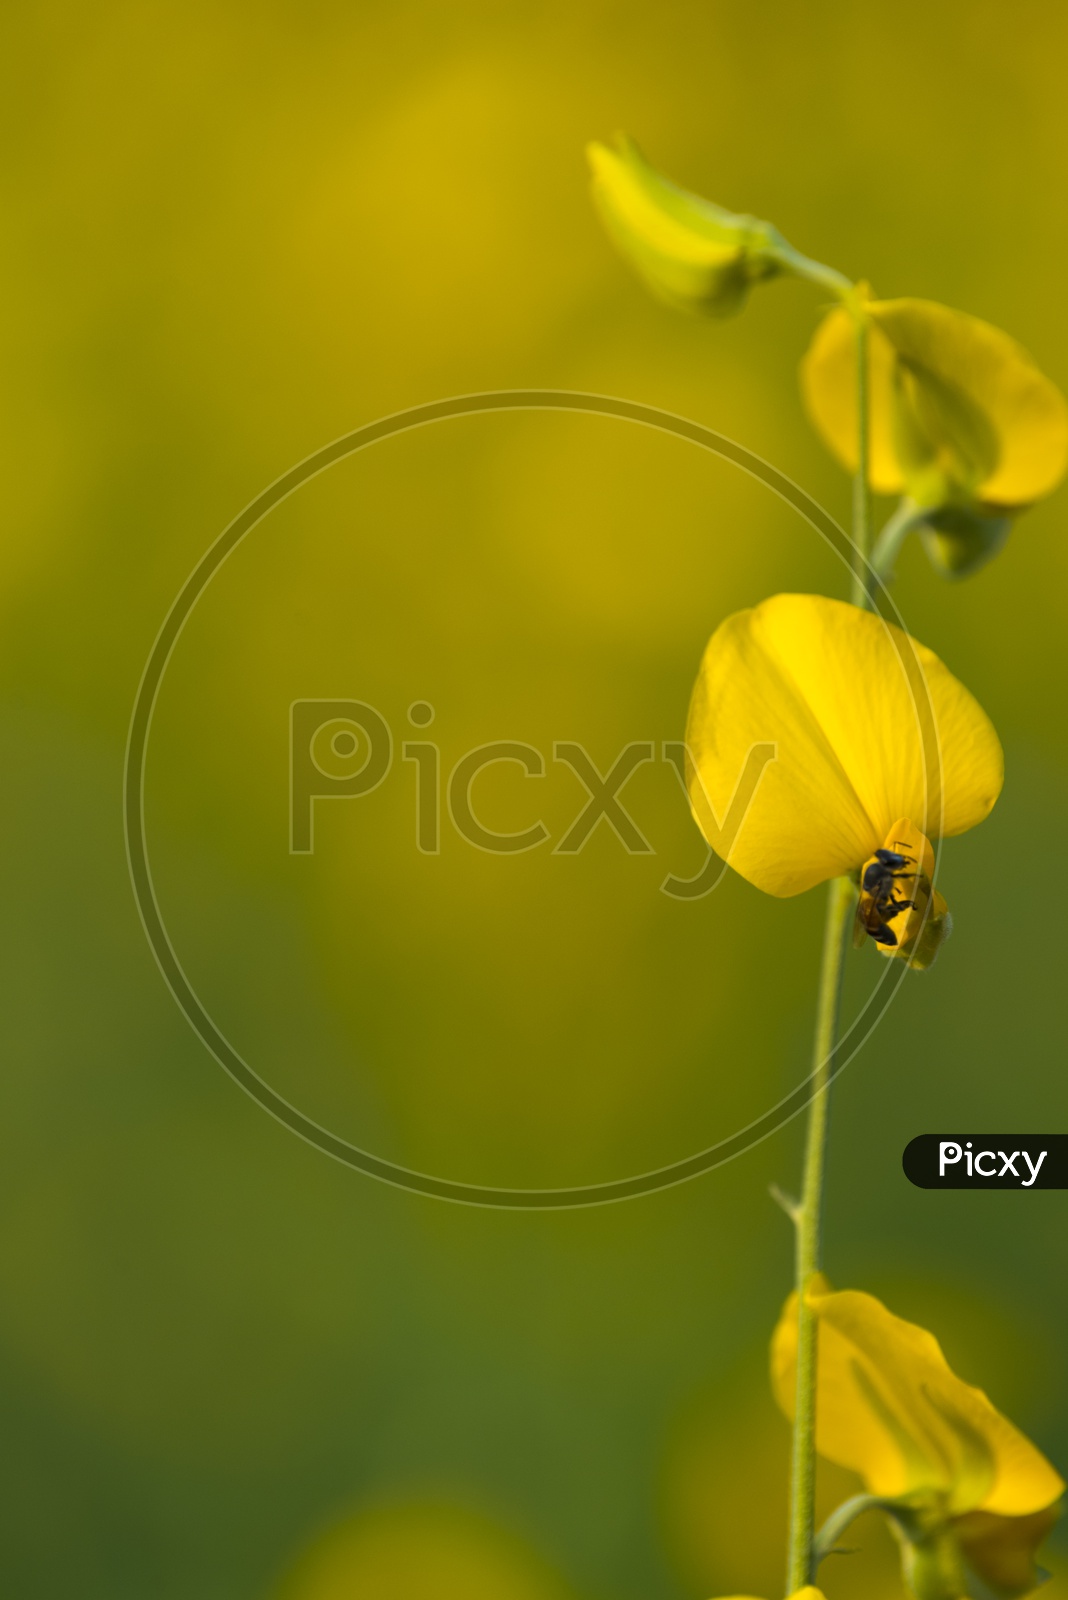 Mustard Plant With Yellow Flowers in a Field Backdrop